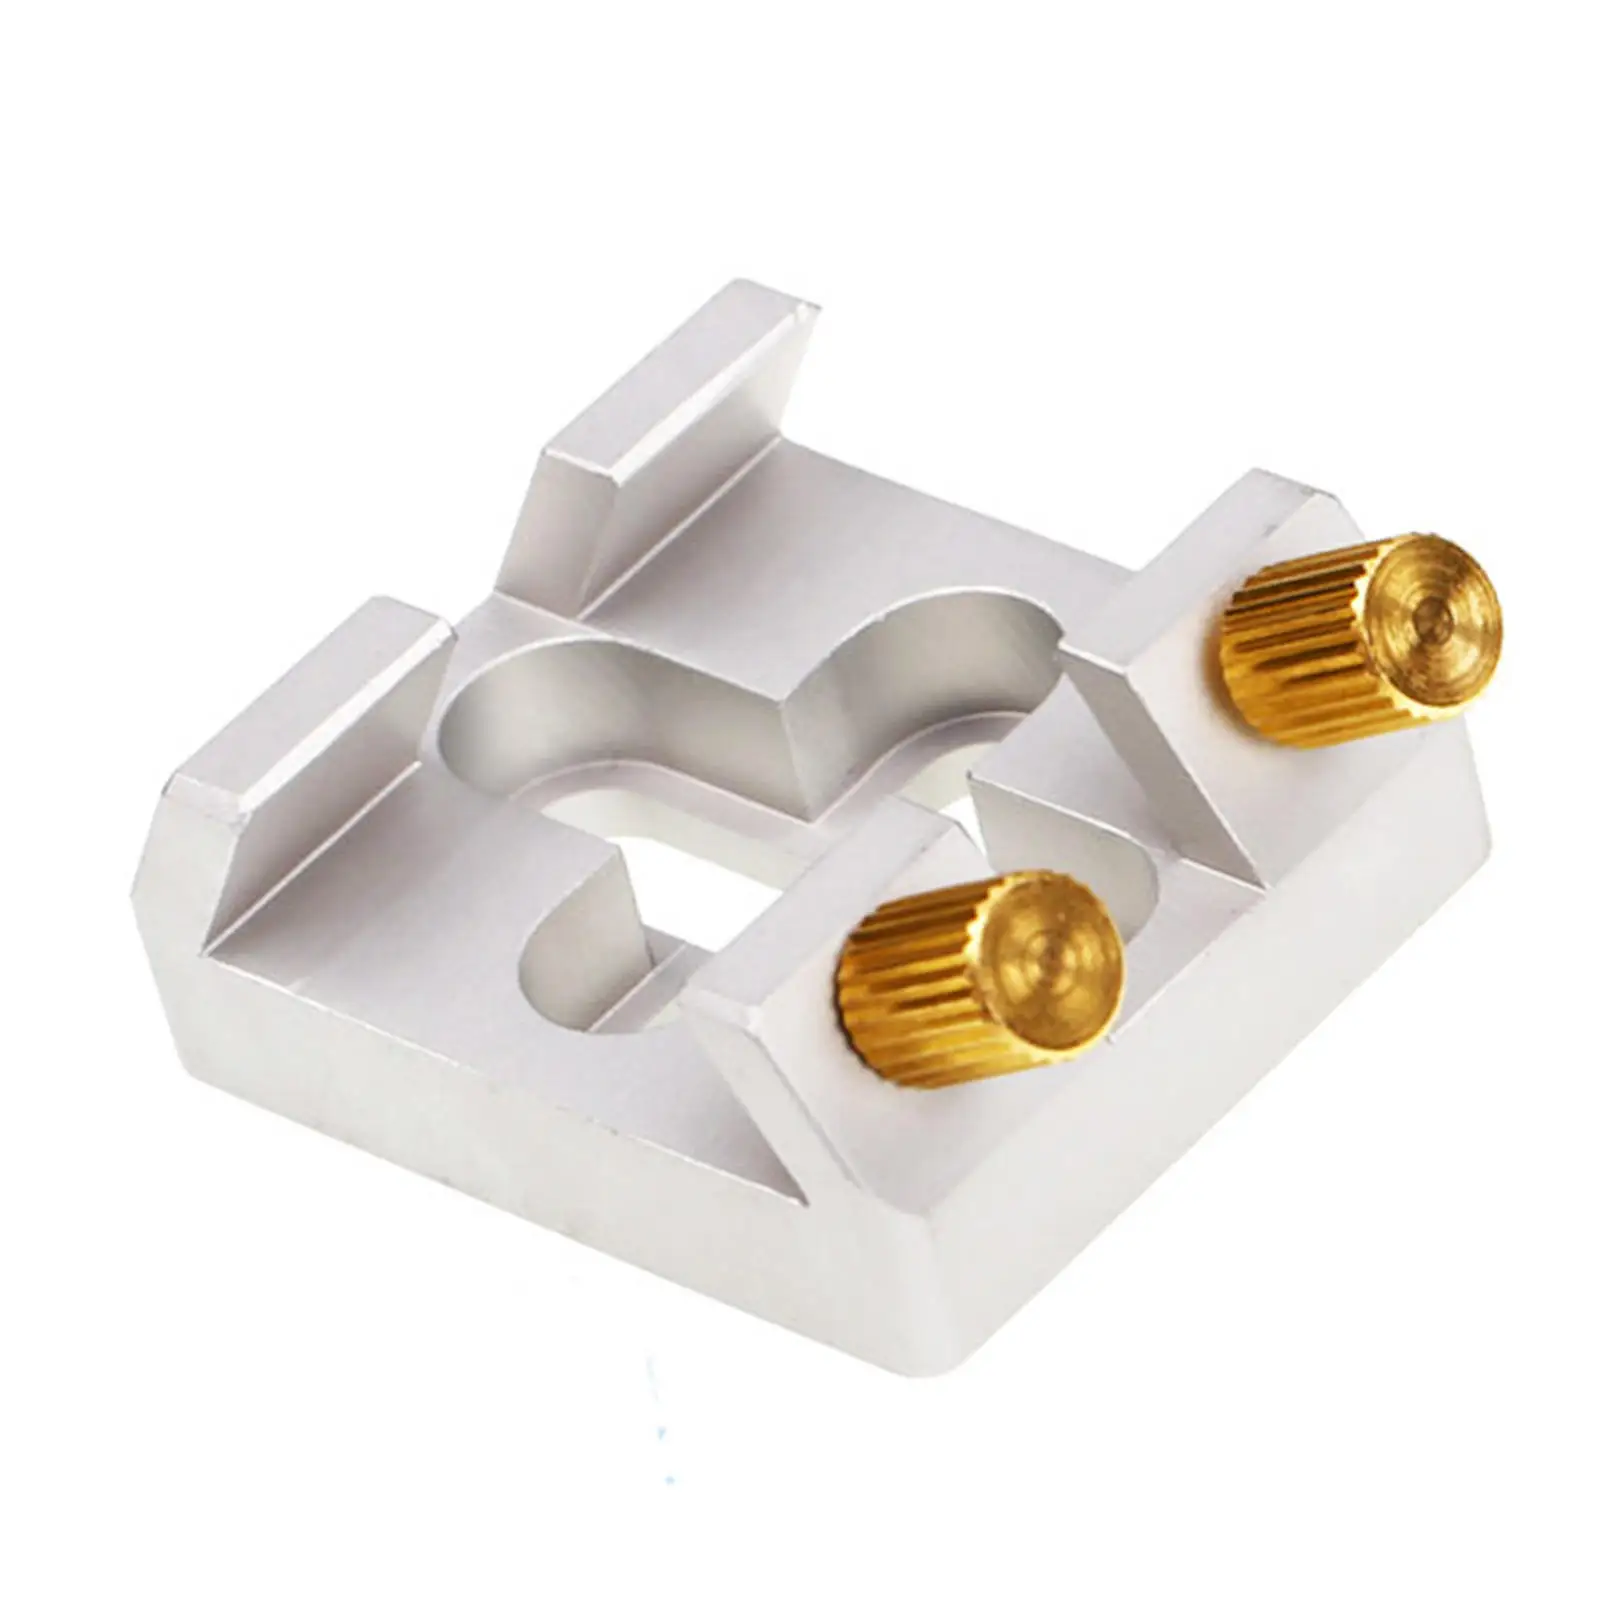 Universal Dovetail Base for Finder Scope Dovetail Slot Plate Aluminium Alloy Finderscope Mount Bracket Accessories